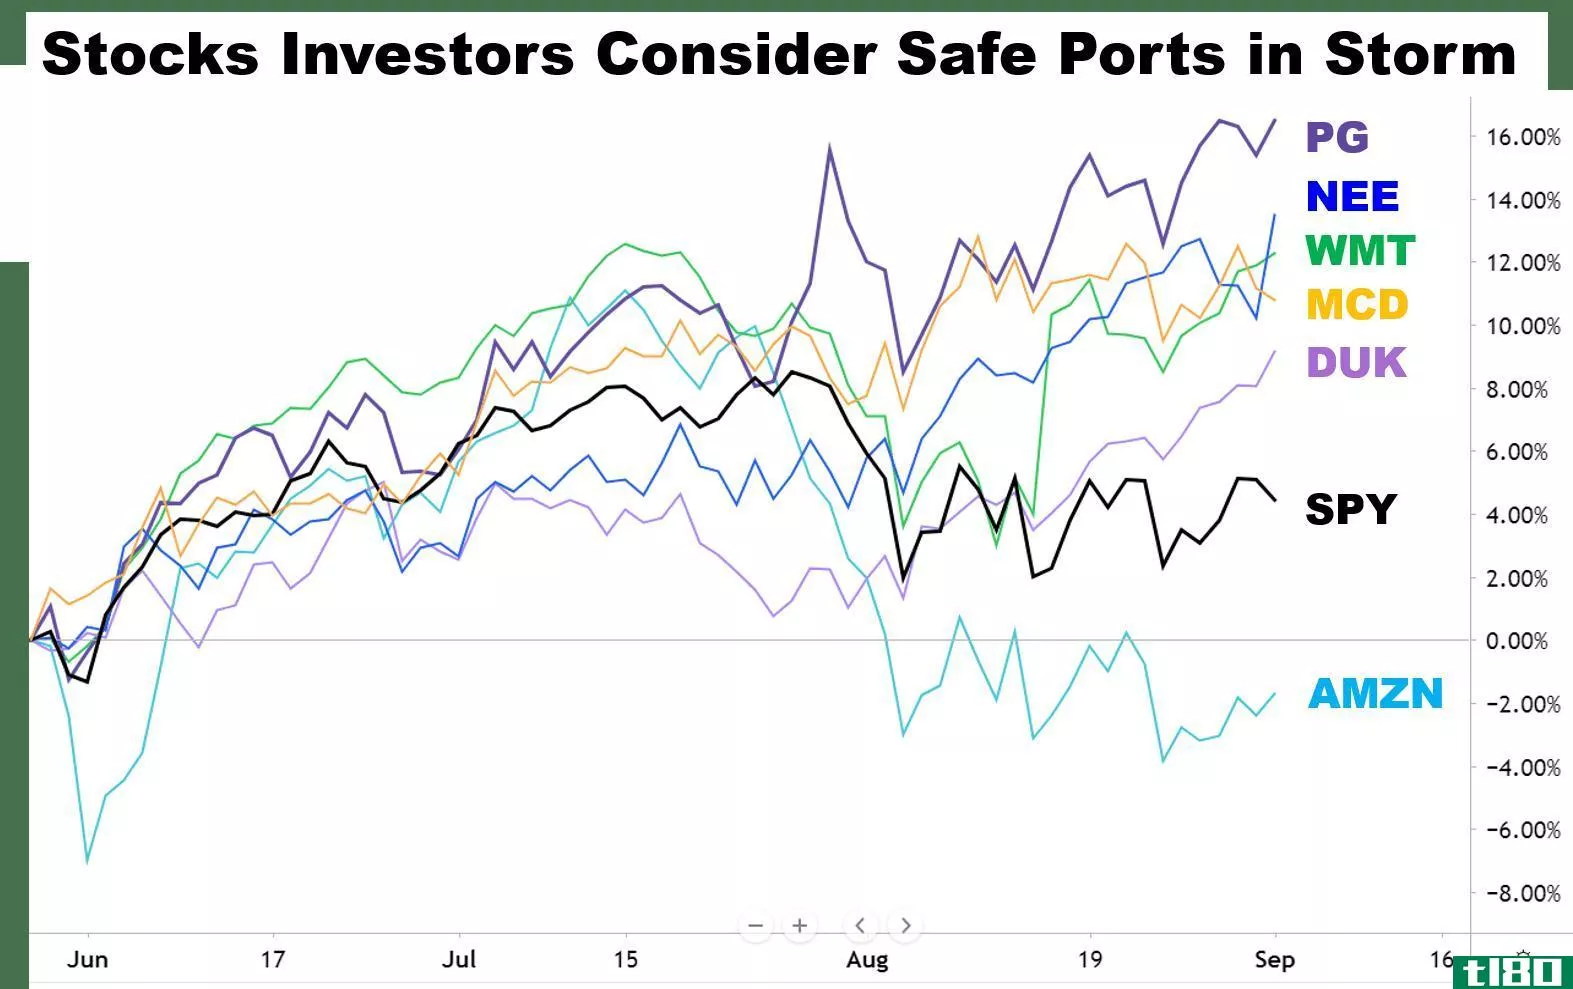 Chart showing performance of stocks investors c***ider safe ports in storm